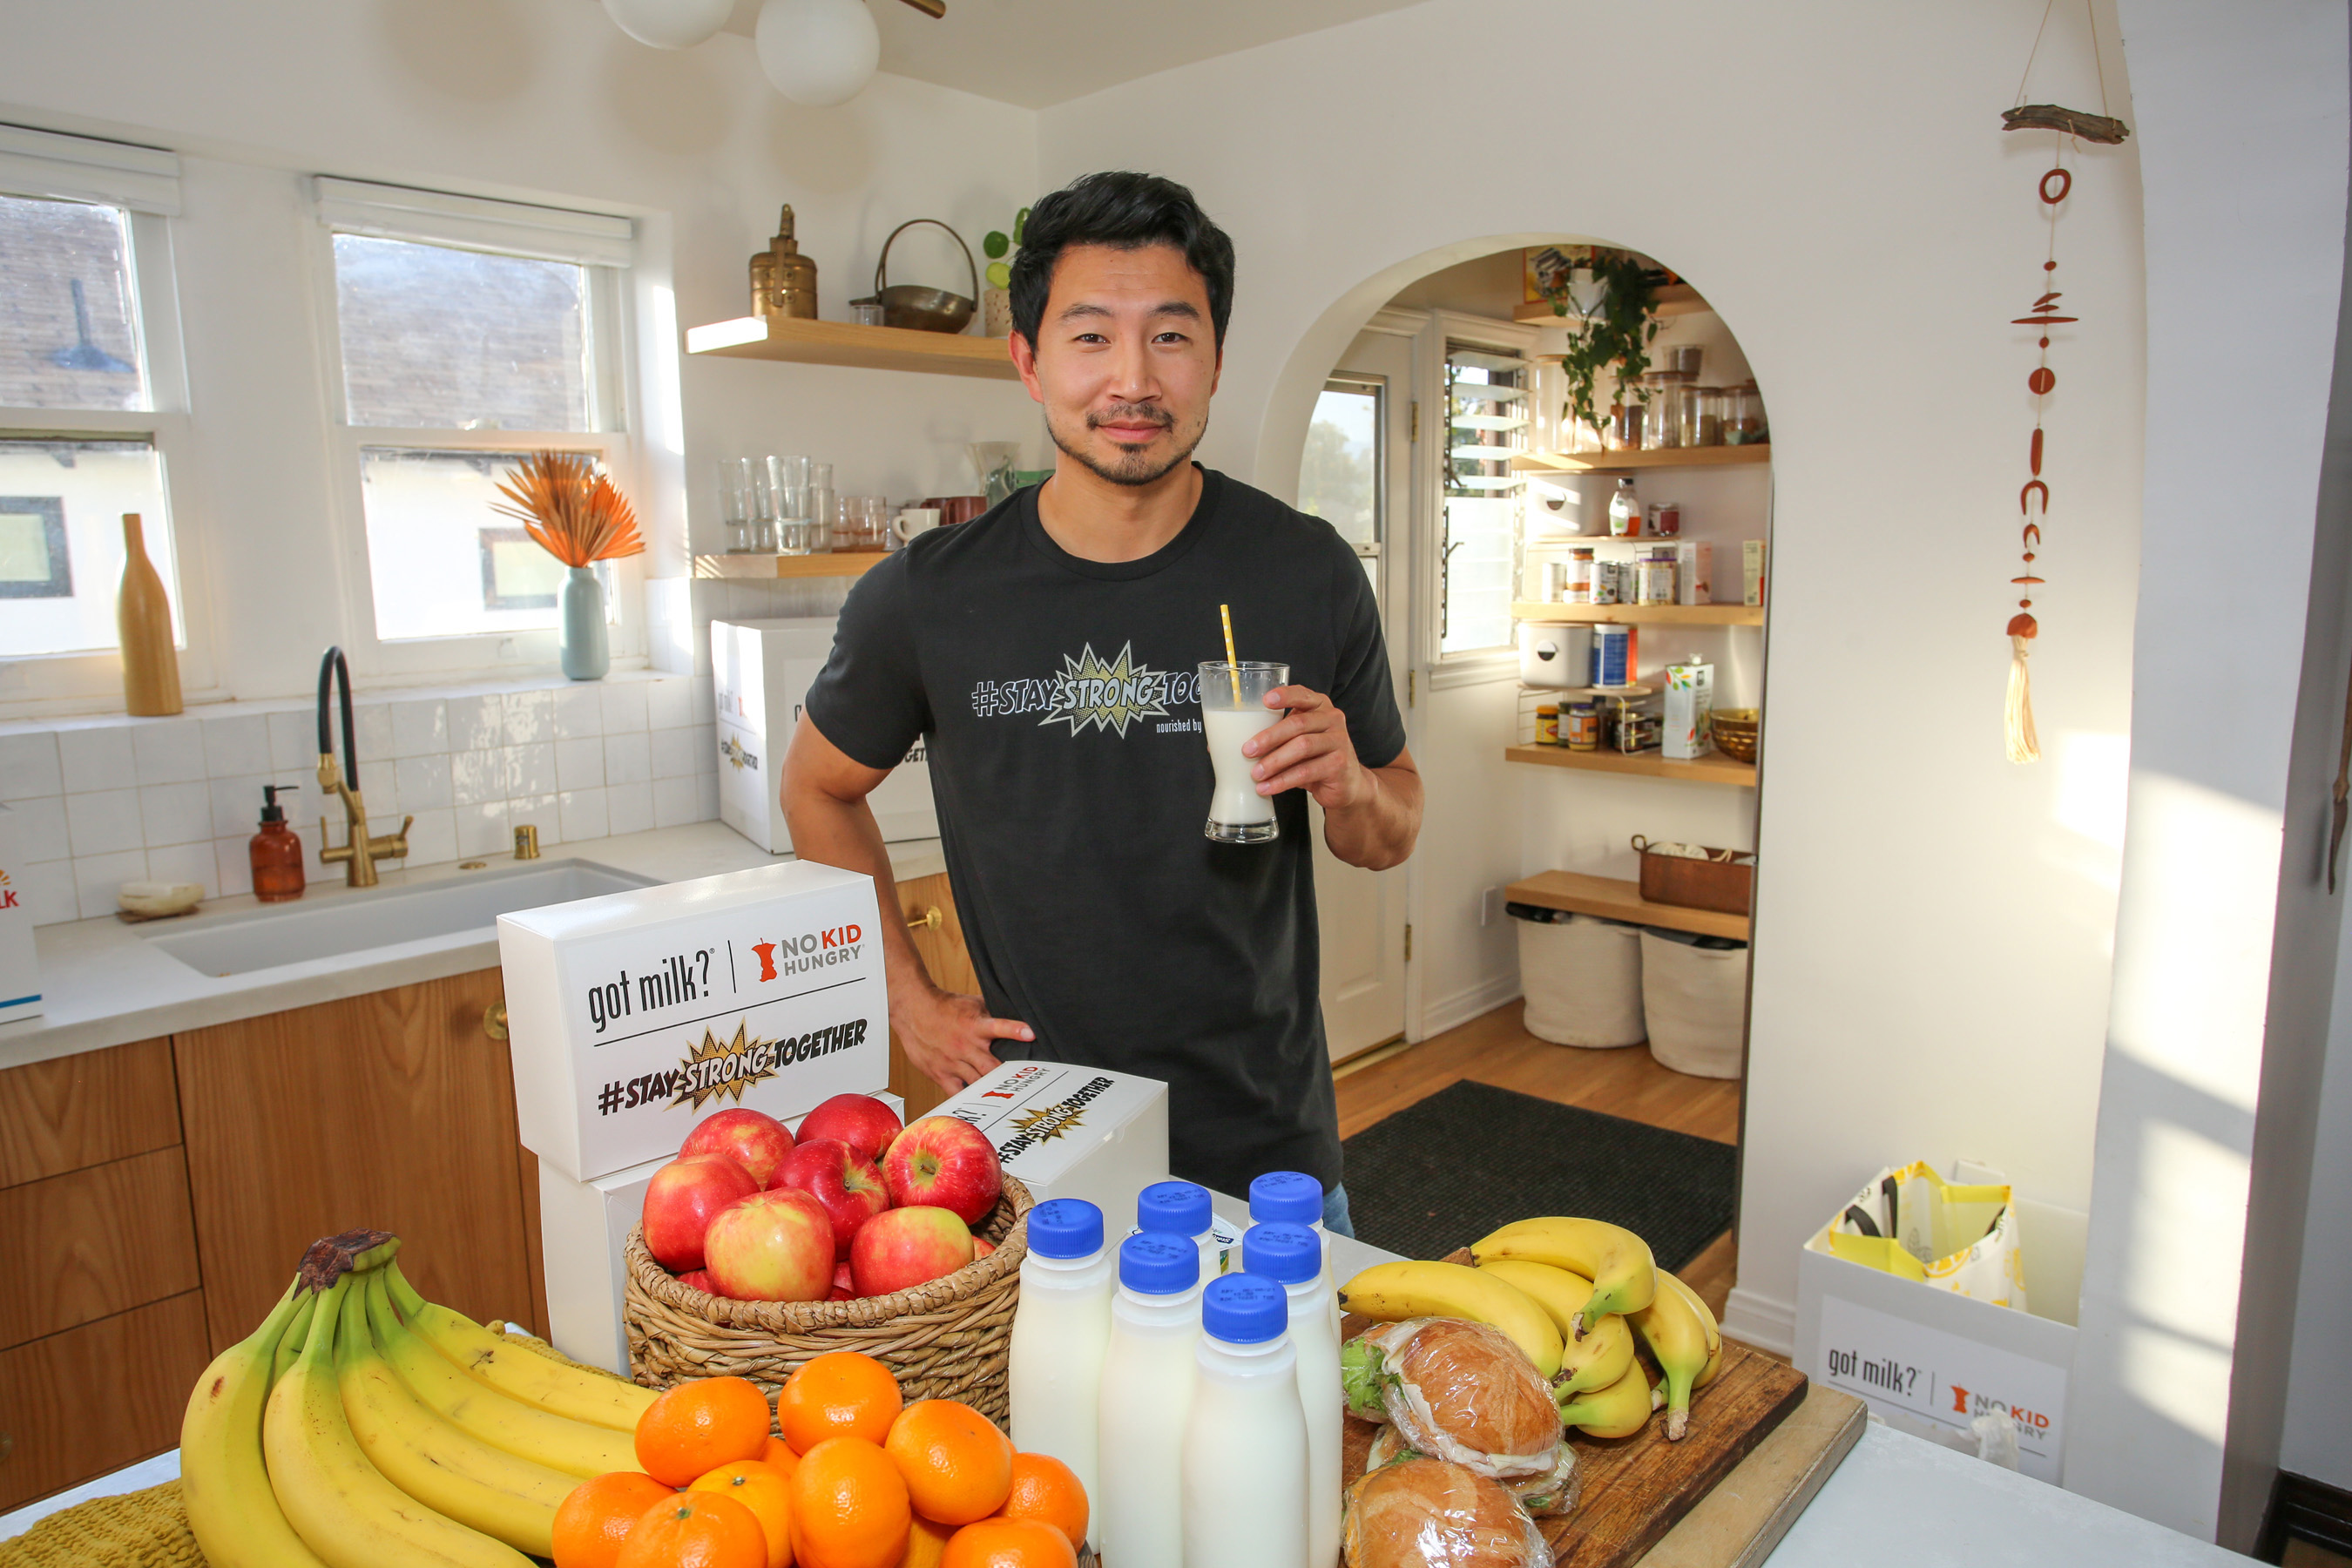 Marvel ‘Shang Chi’ Super Hero, Simu Liu, joins the creators of ‘got milk?’ on Thursday, May 13, 2021, to kick-off the #StayStrongTogether challenge on IG and Twitter with the debut of a fun video. The effort marks a partnership between California Milk Processor Board and No Kid Hungry to help provide up to 1 million meals to school feeding programs throughout the Golden State. (Photo by Rachel Murray Framingheddu for CMPB/Getty Images).